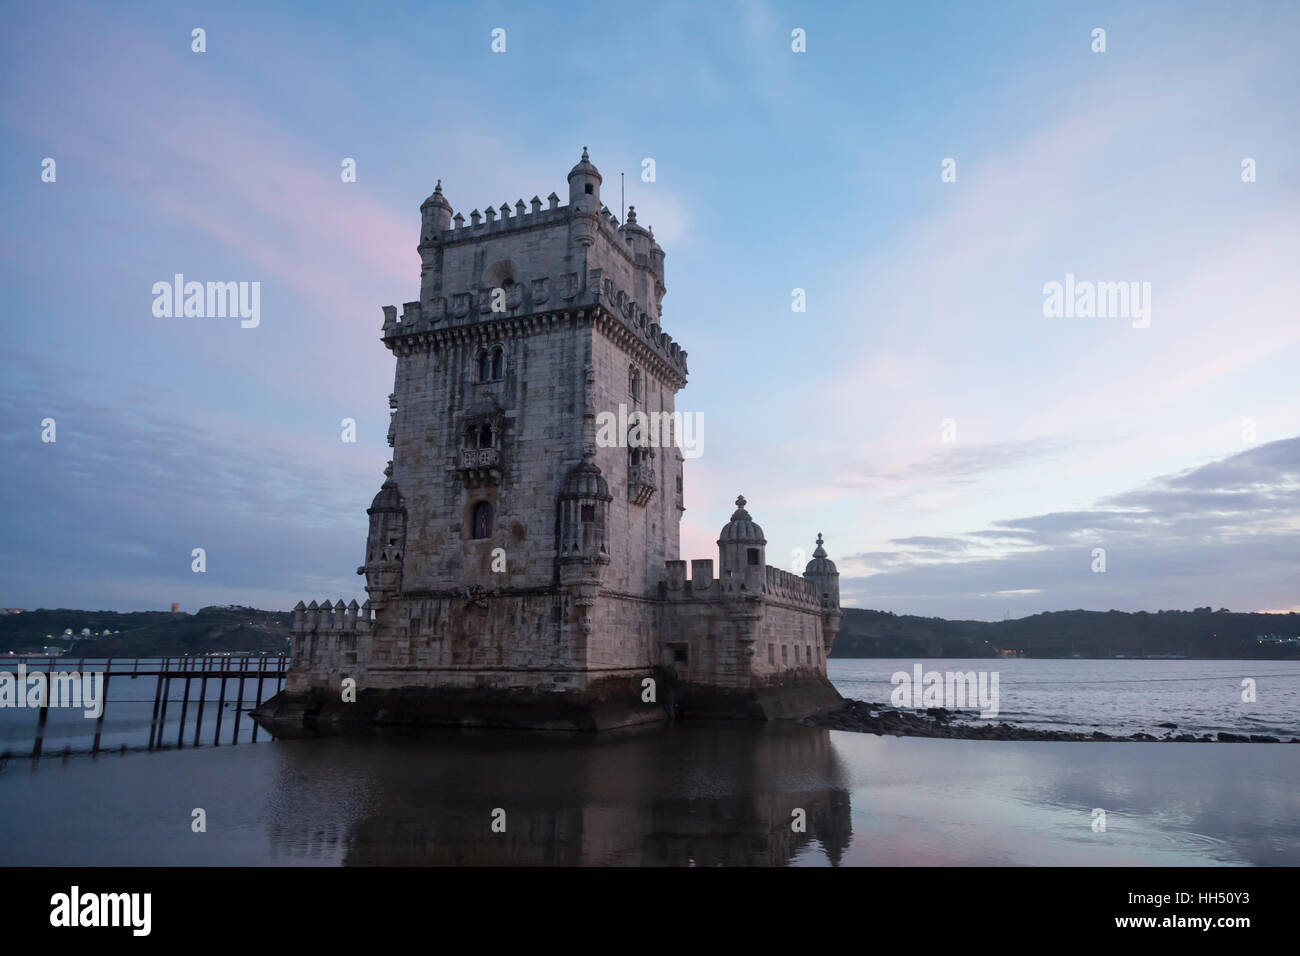 Lisbon, Portugal: Belém Tower on the bank of the Tagus River. The 16th century fortification is a prominent example of the Portuguese Manueline style. Stock Photo